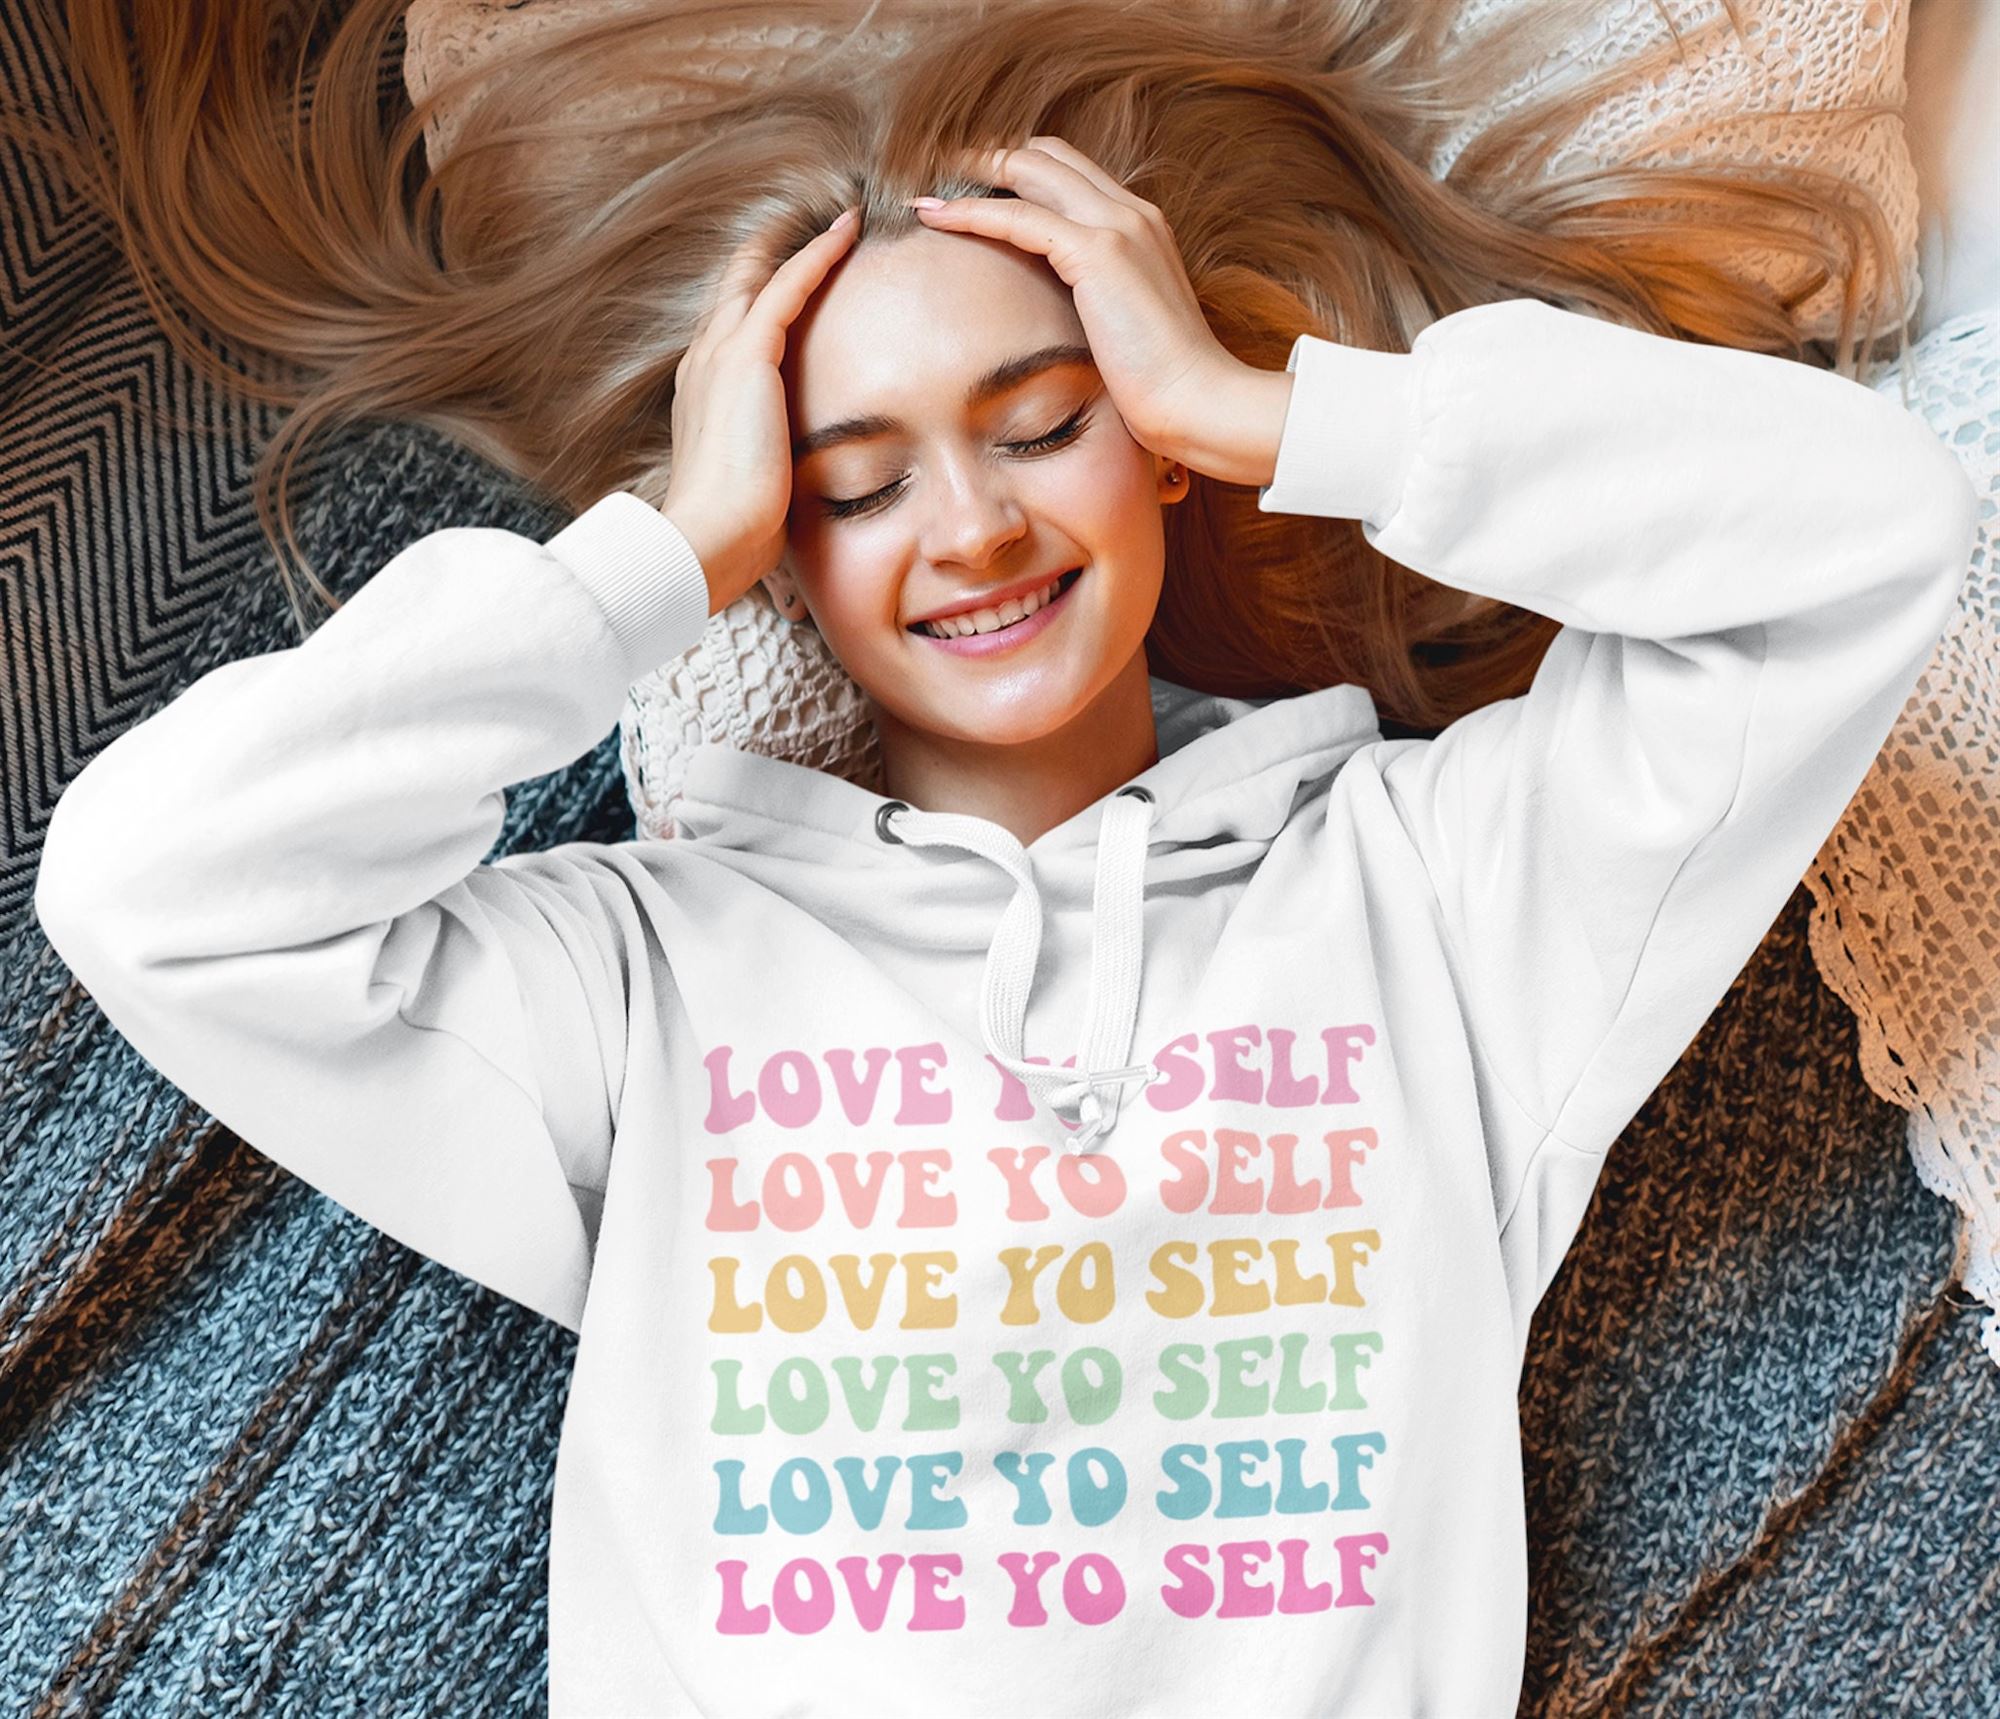 Promotions Women's Love Yourself Hoodie Self Care Gift Gift For Her Inspirational Shirt Positive Motivational Quote Mental Health Shirt 